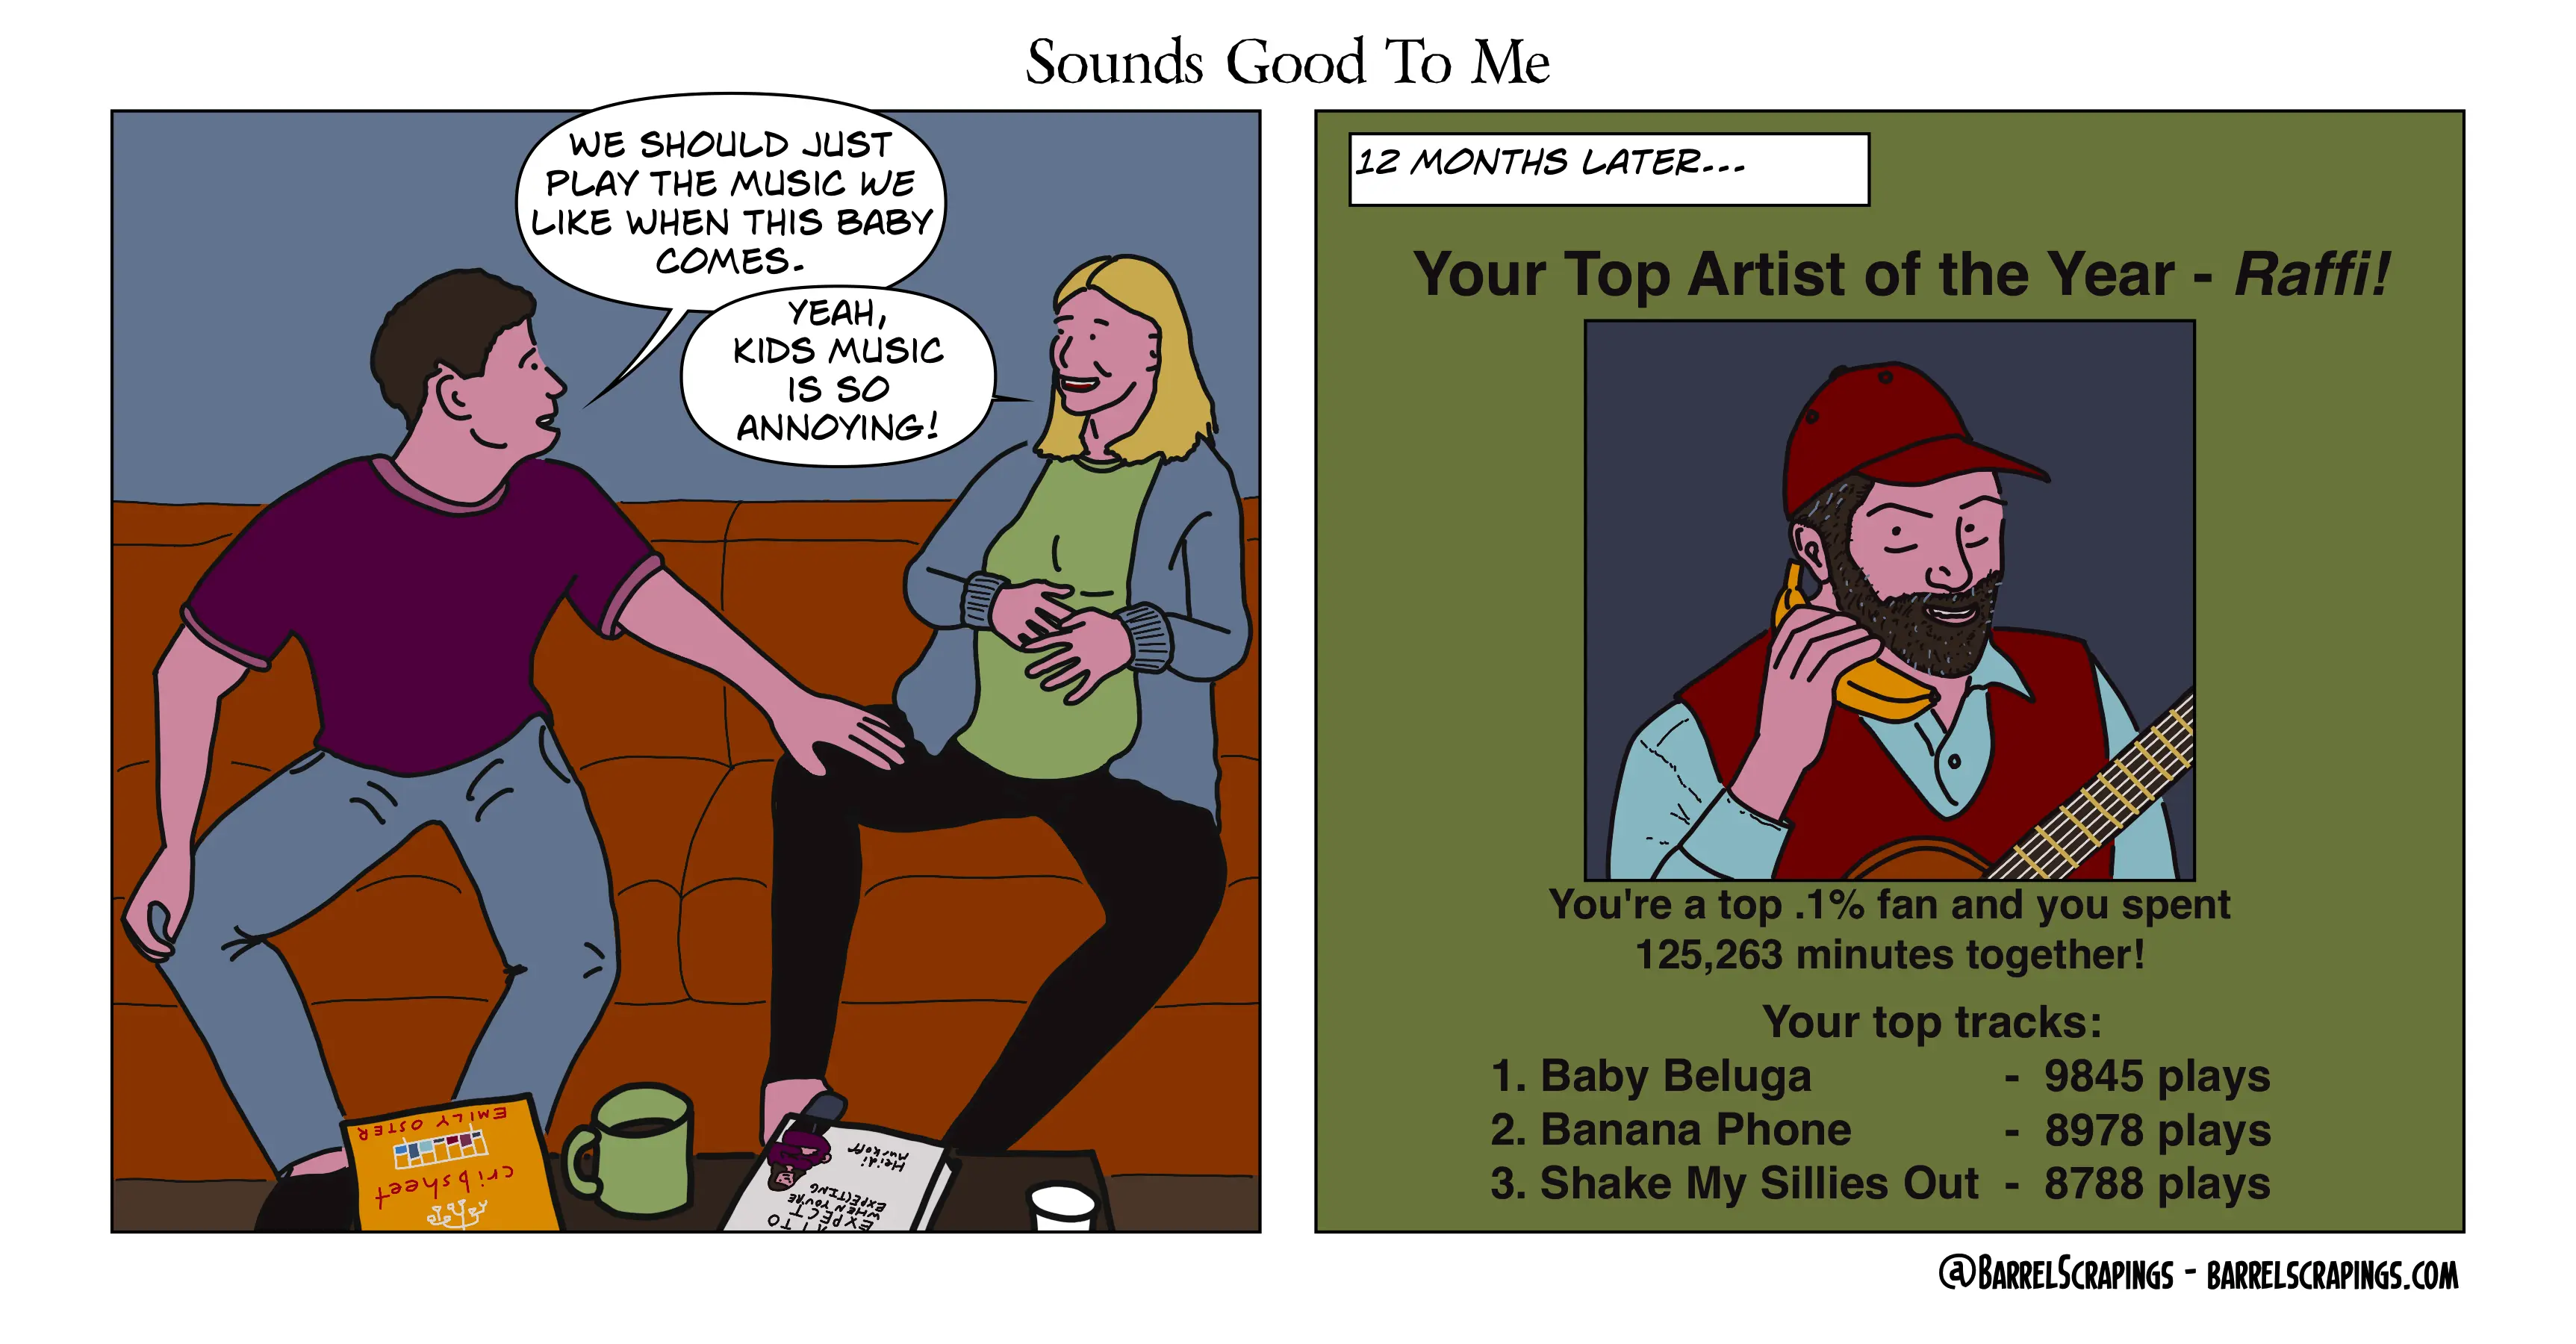 Panel 1: Husband and very pregnant wife on a couch. Husband: “We should just play the music we like when this baby comes.” Wife: “Yeah, kids music is so annoying!”. Panel 2: Caption: 12 months later. “Your top artist of the year - Raffi! You’re a top .1% fan and you spent 125,263 minutes together! Your top tracks: Baby Beluga, 9845 plays. Banana Phone 8978 plays. Shake My Sillies Out - 8788 plays”